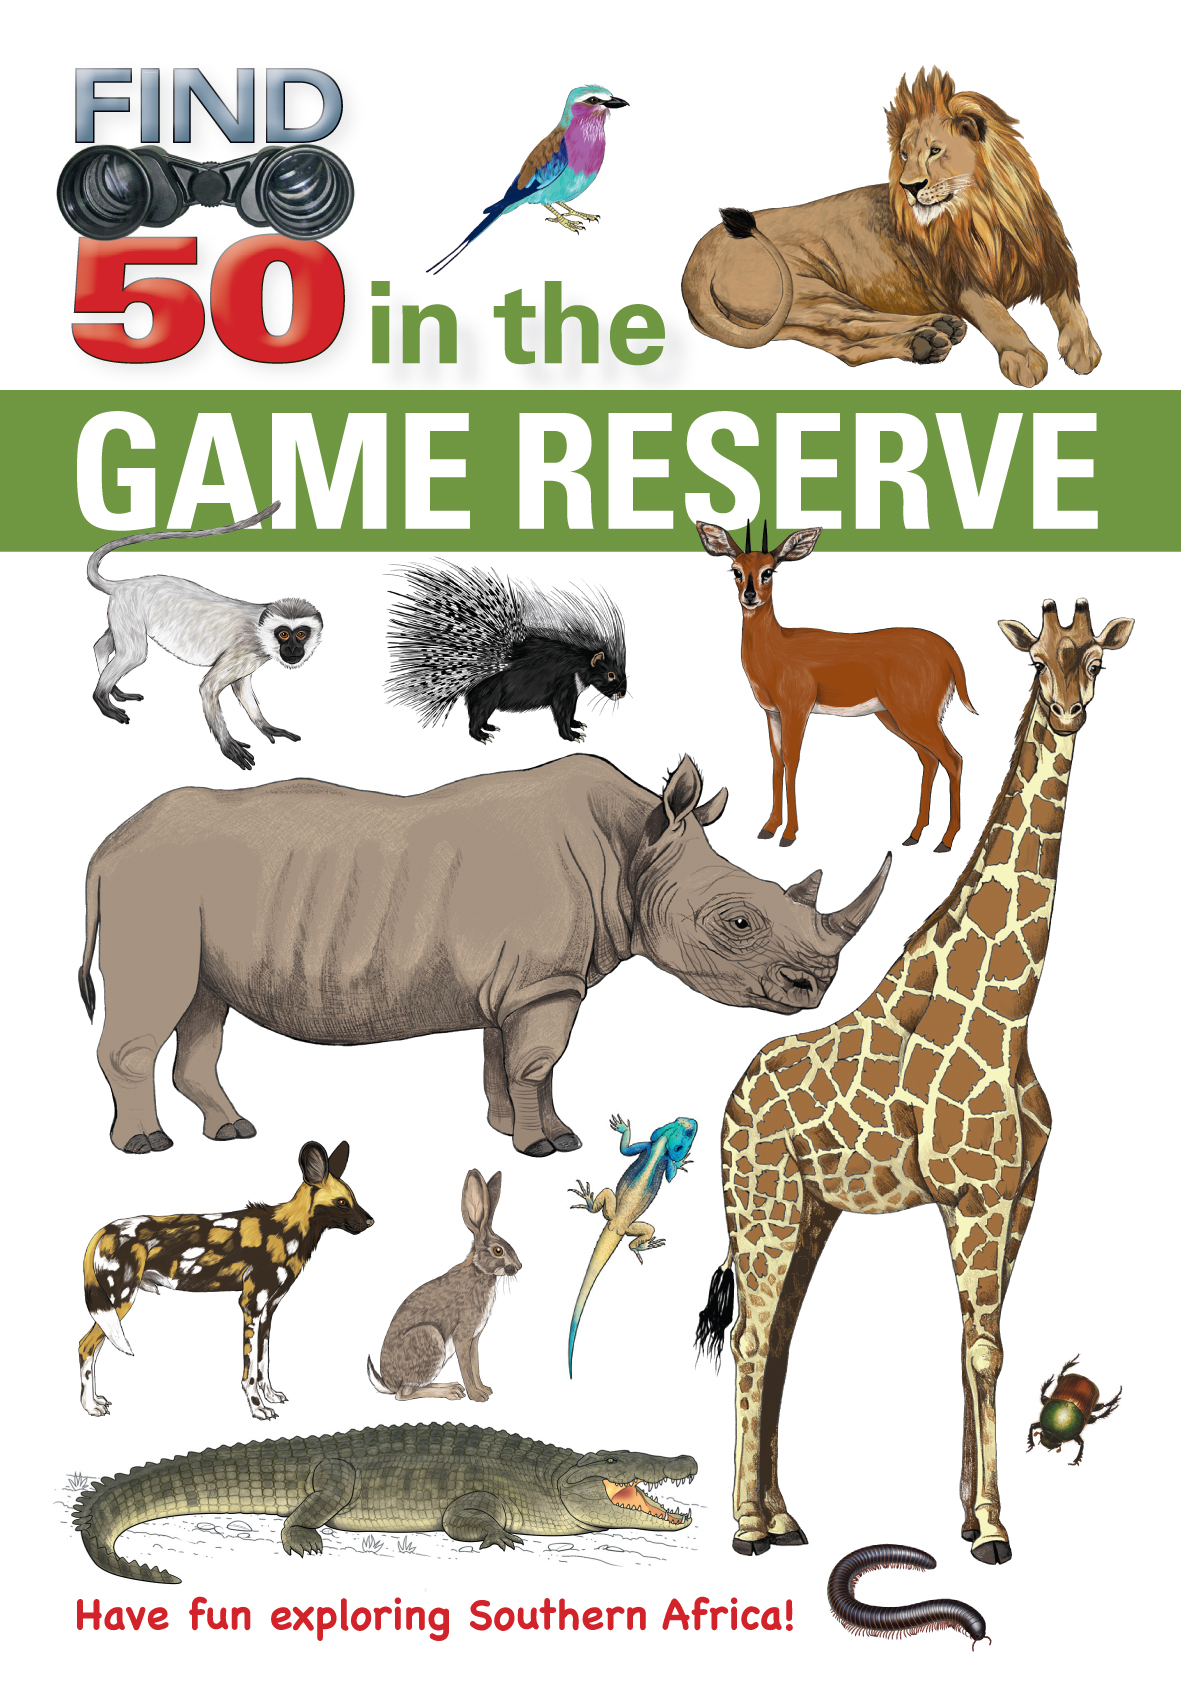 Picture of Find 50 in the game reserve